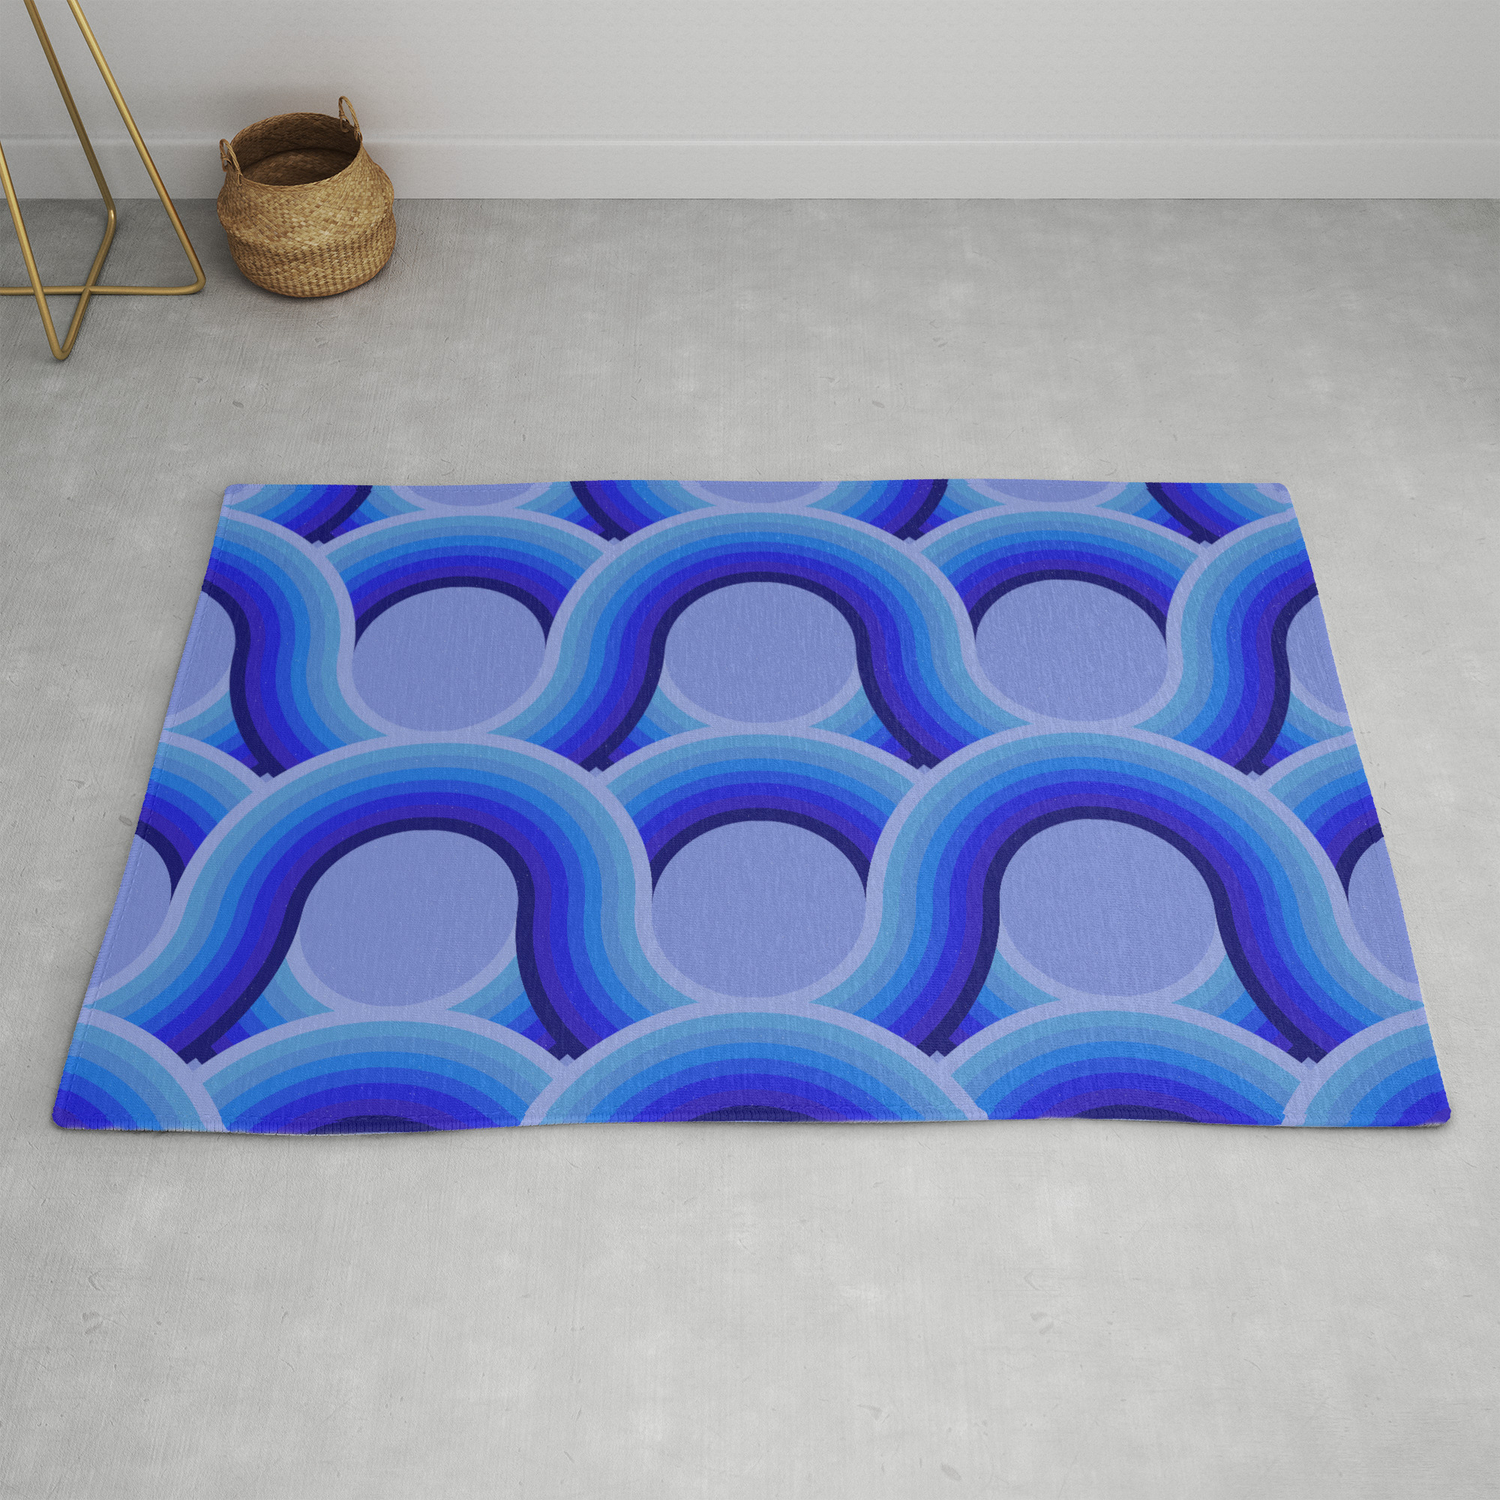 Rollin Retro Road In Blue Ombre Rug By, Blue Ombre Rug